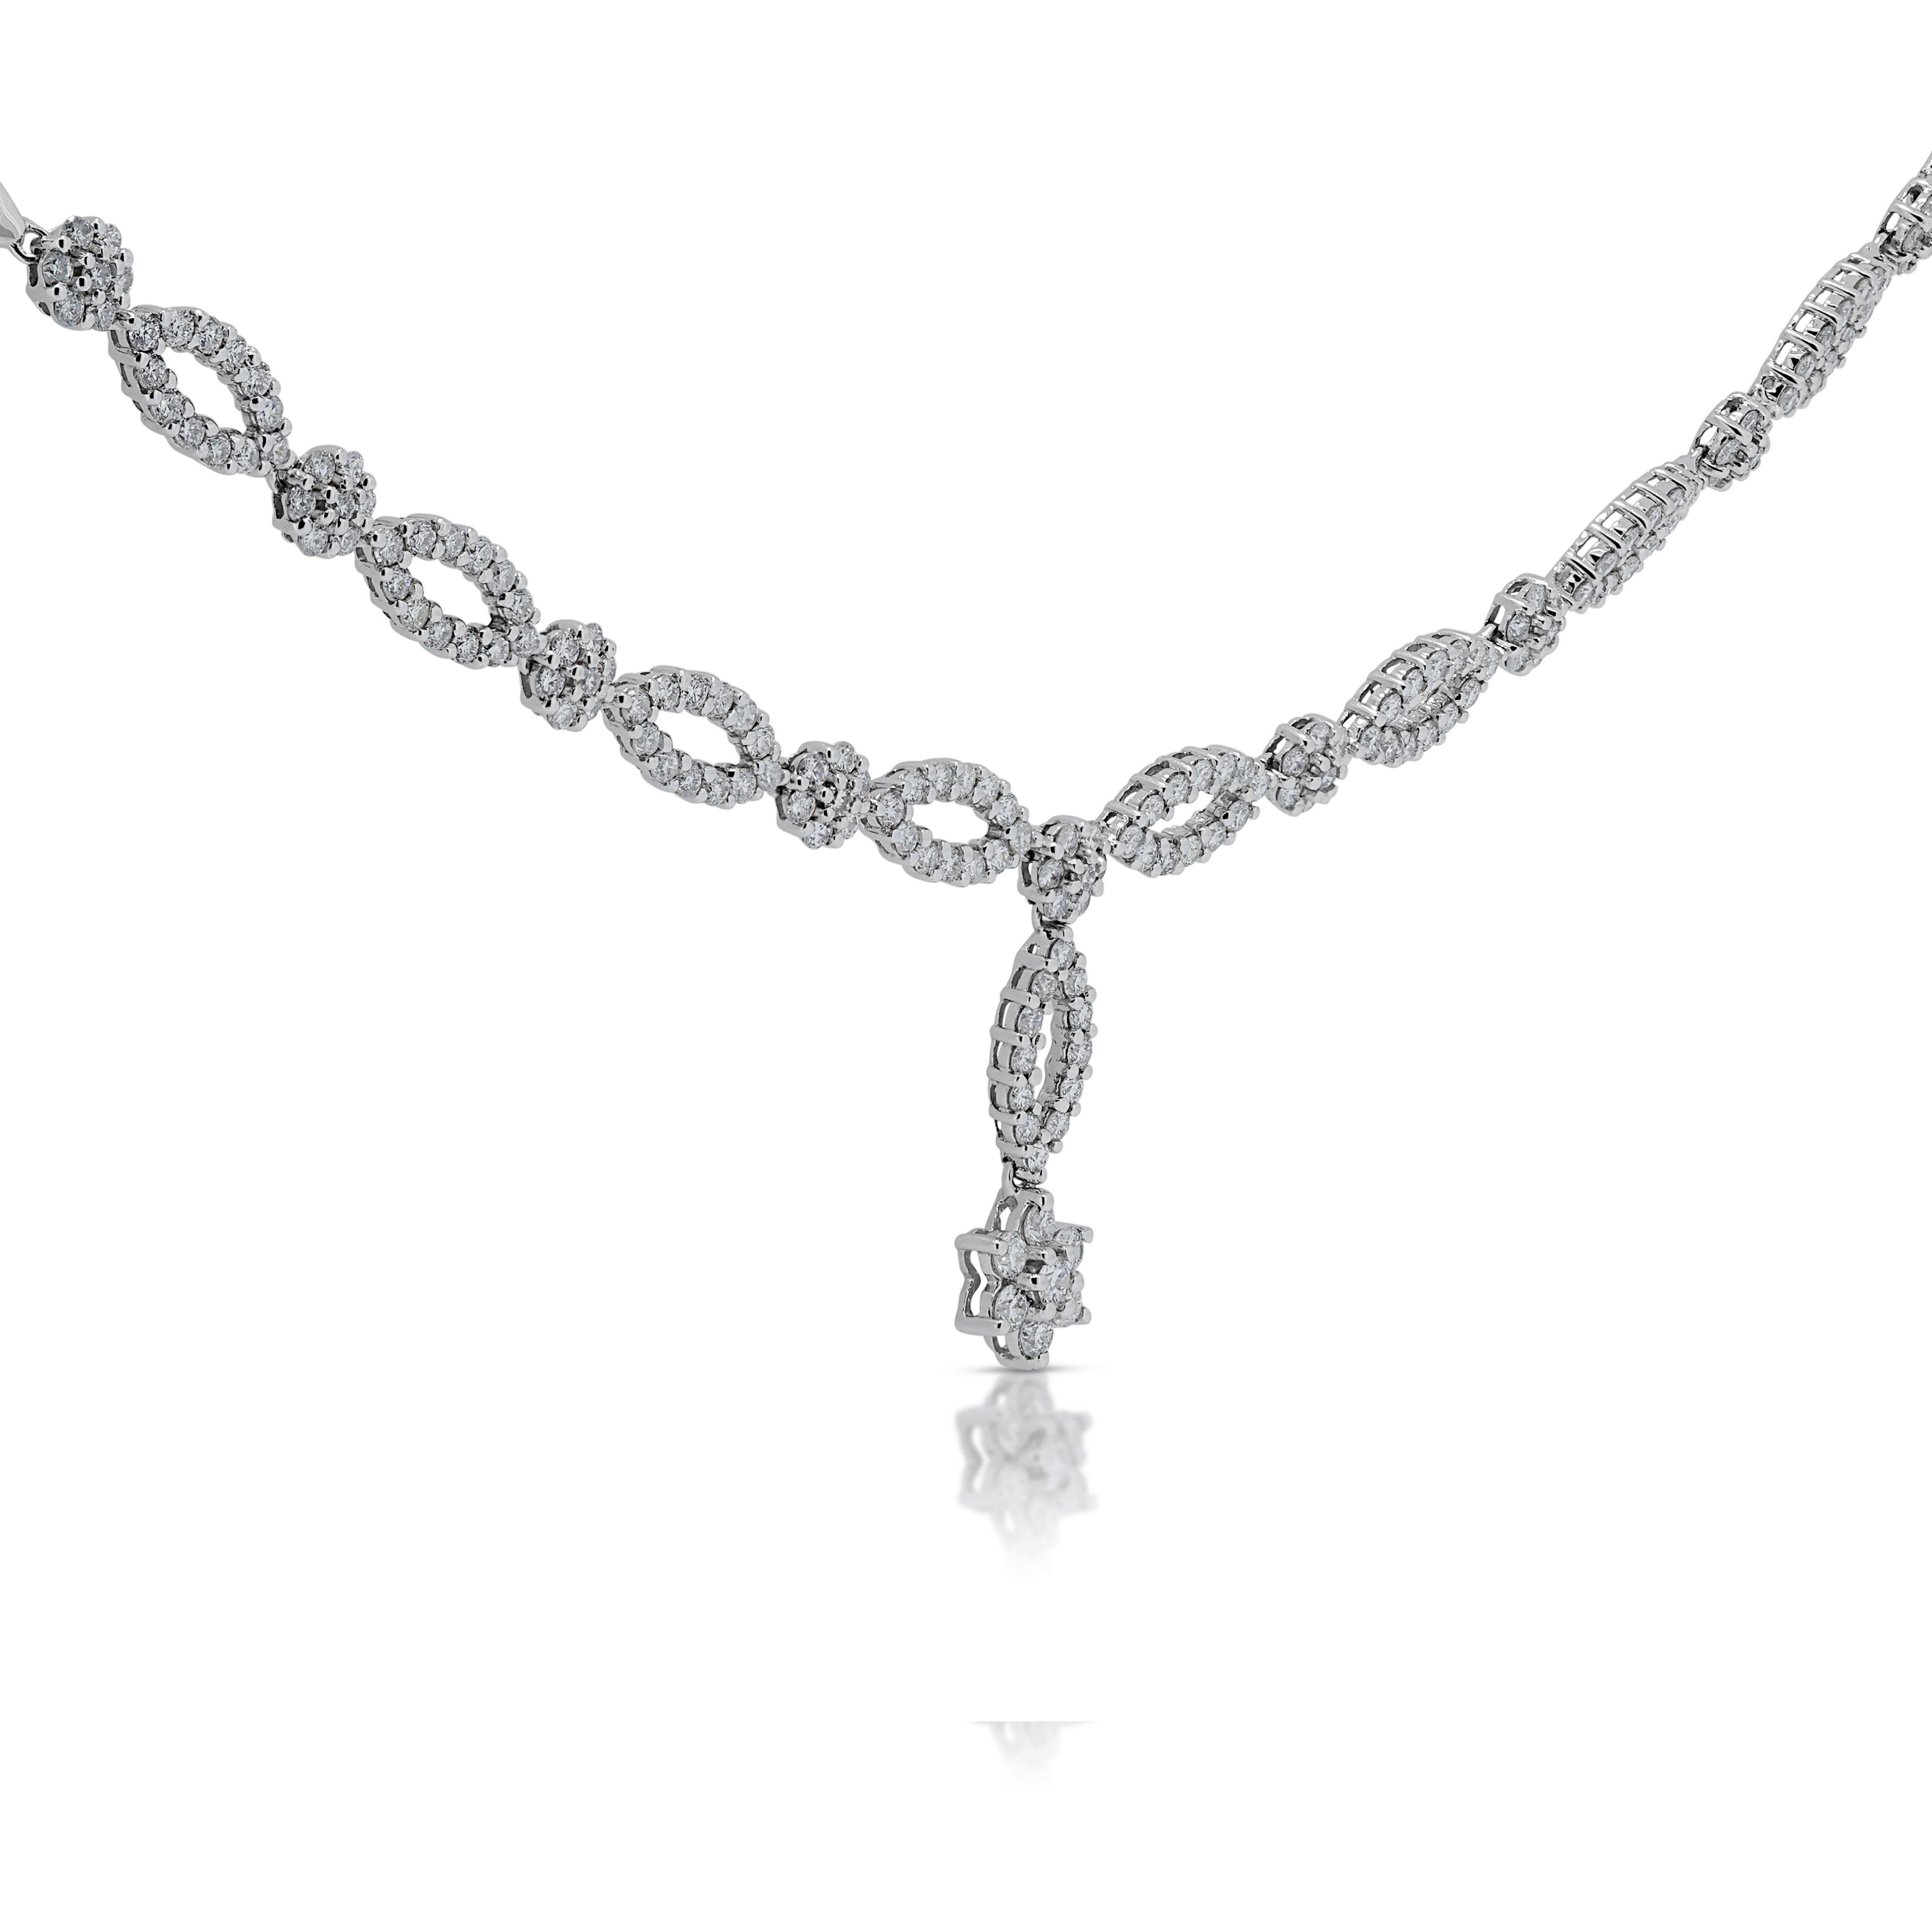 Fascinating 1.815ct Diamonds Necklace in 18K White Gold In Excellent Condition For Sale In רמת גן, IL